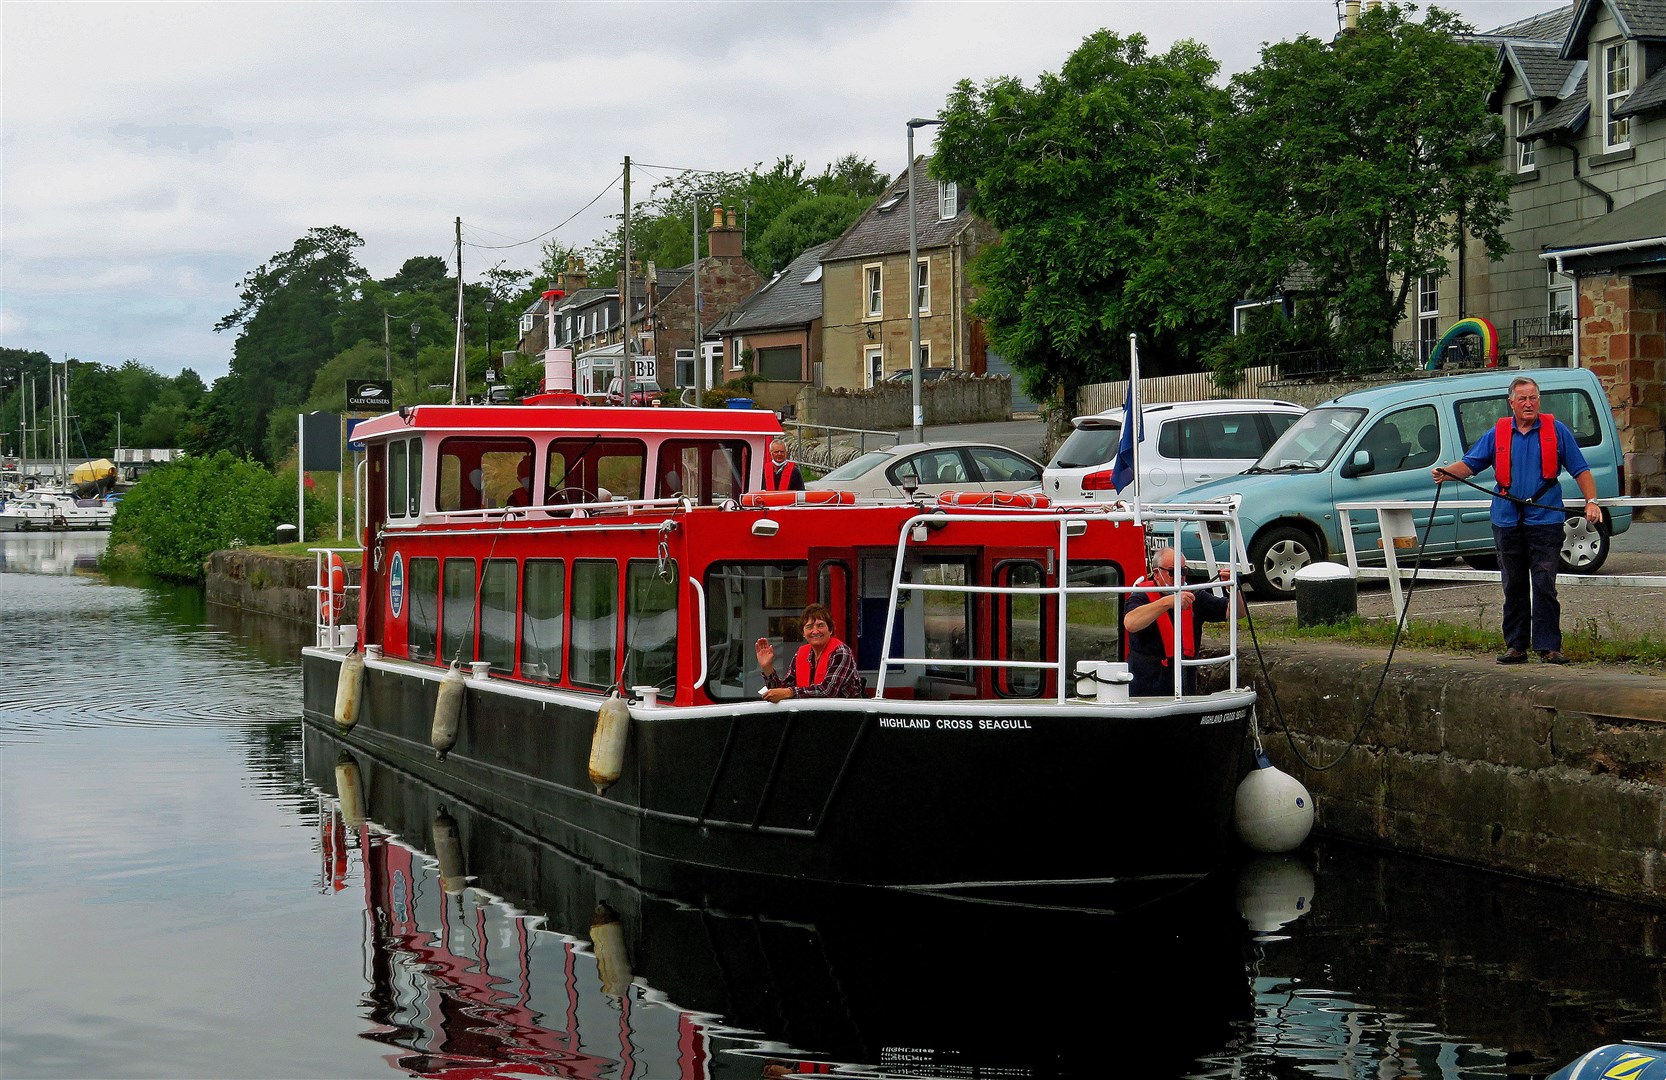 Highland Cross Seagull parked by the canalside, with volunteer crew members Brian Macleod on the towpath holding a mooring rope, and Kay Burton and Charlie Watt in the bow.